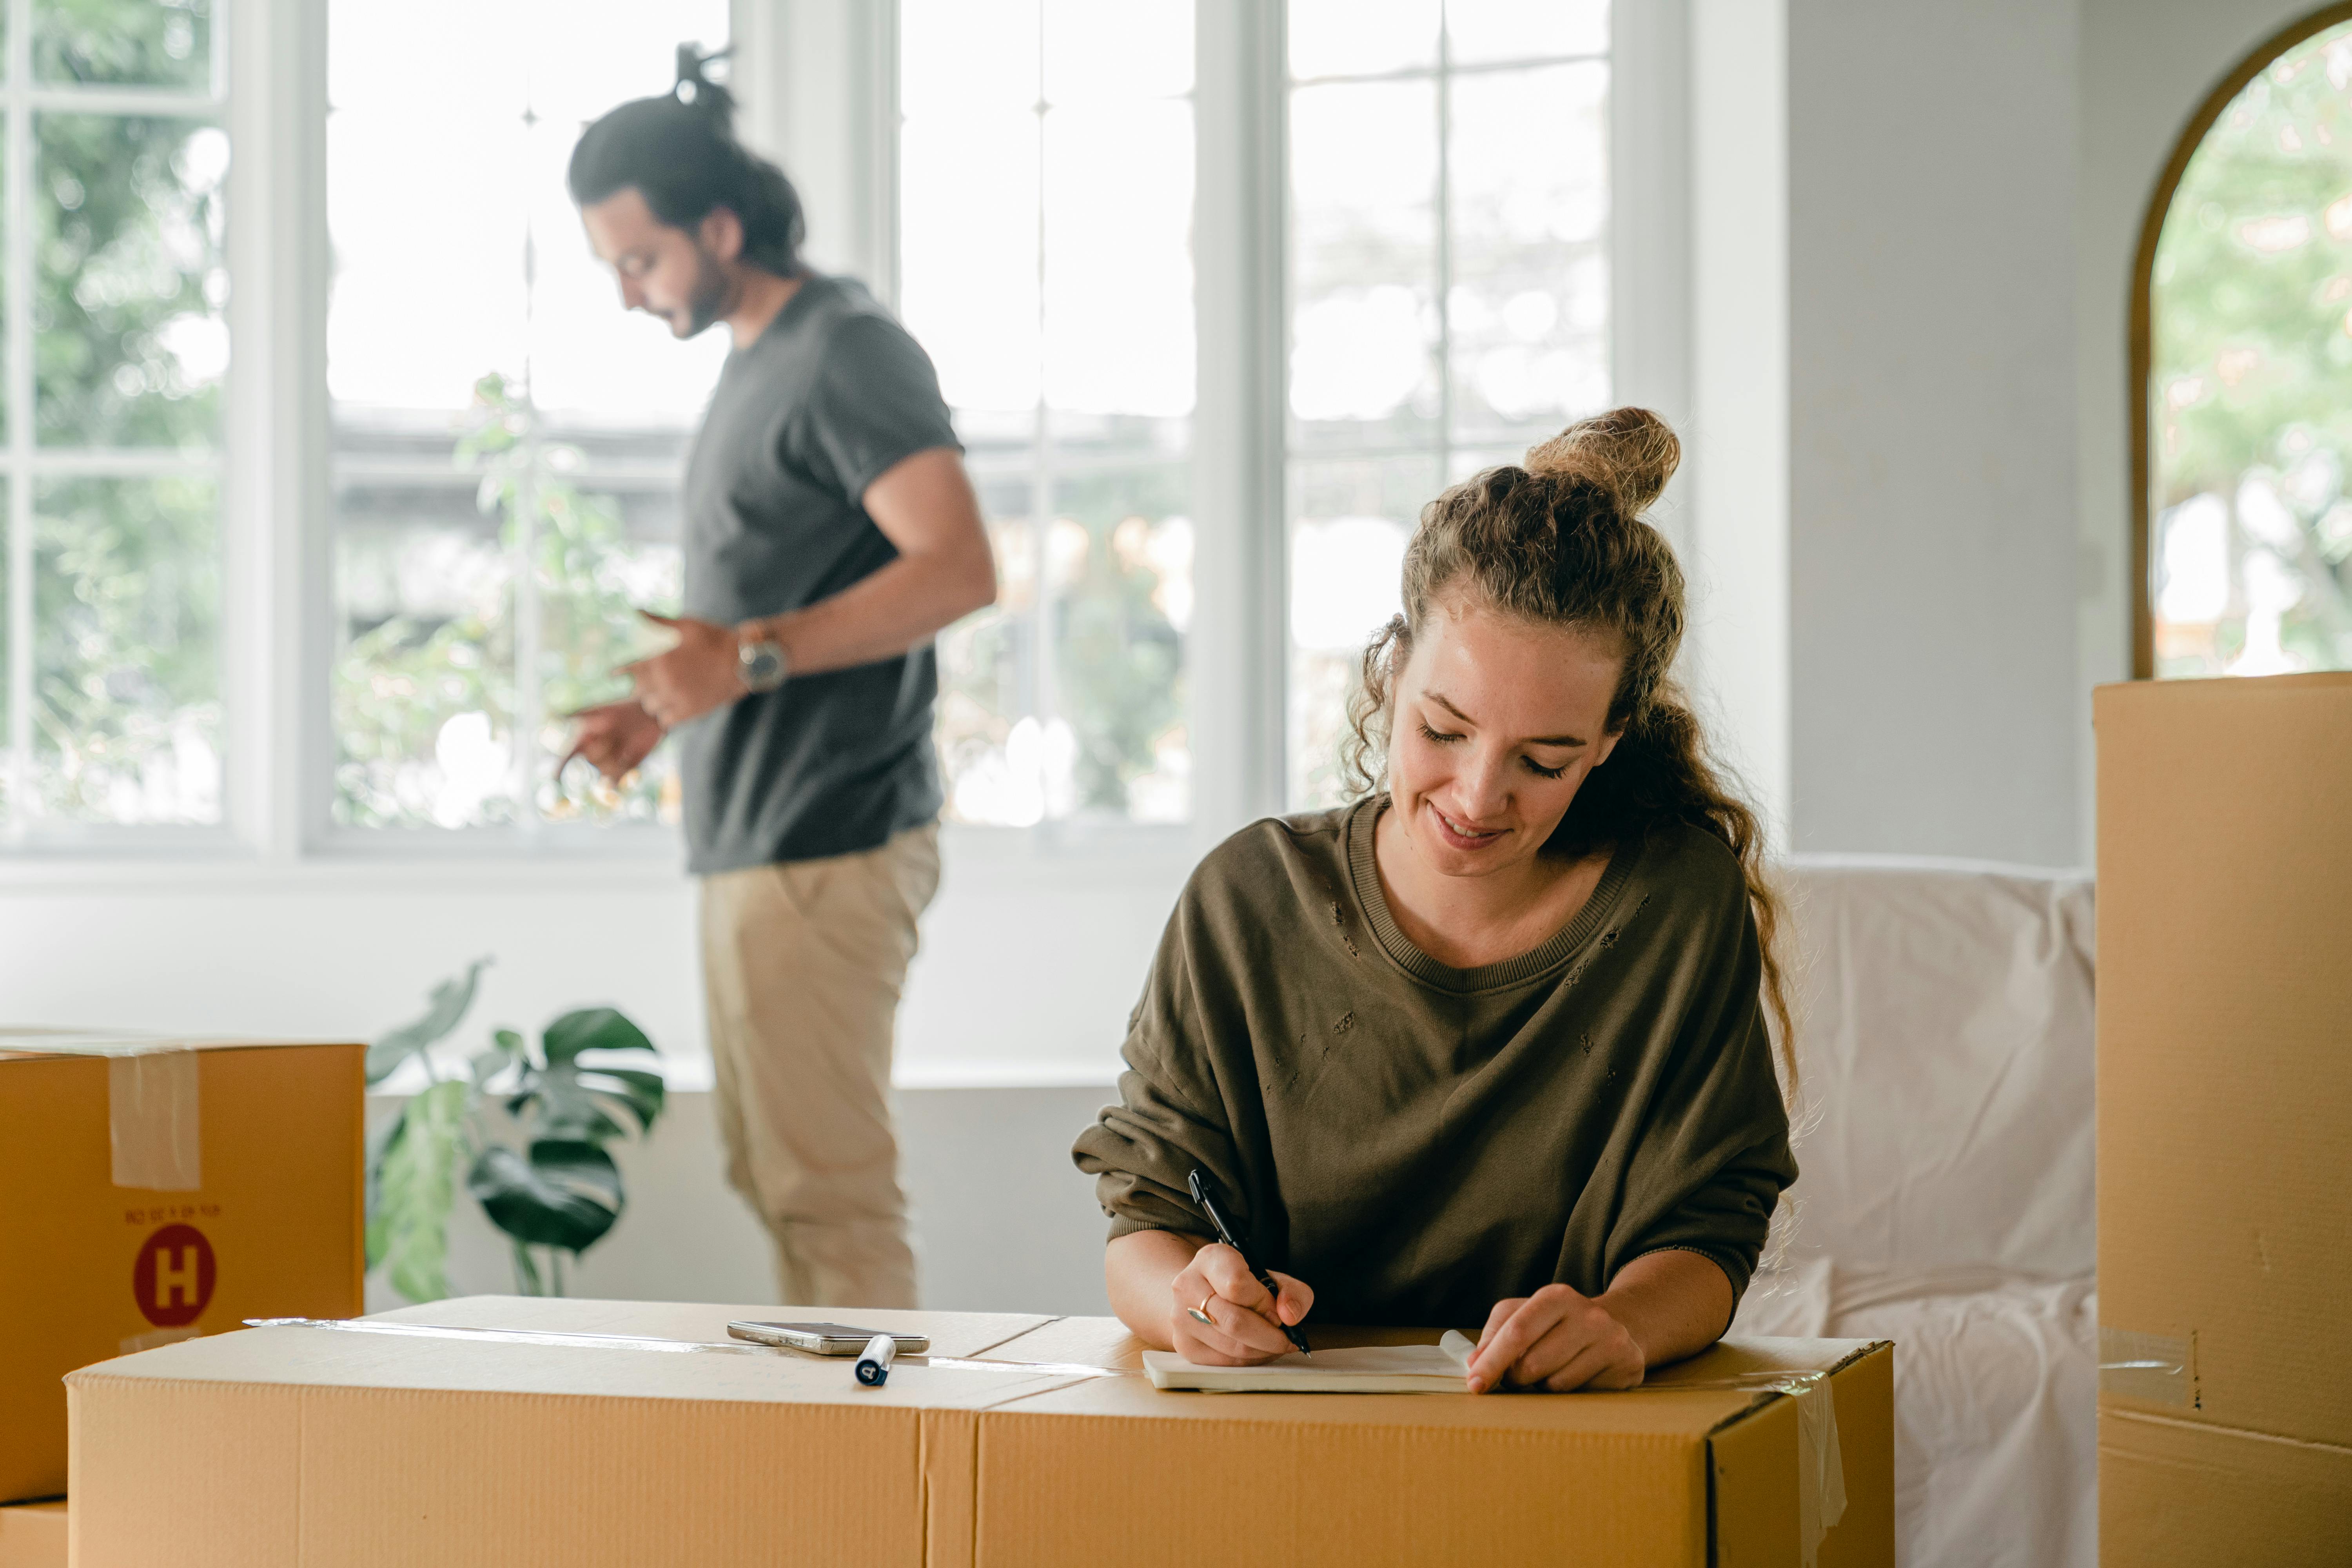 Man and woman move to a new house, and the woman signs some papers | Source: Pexels